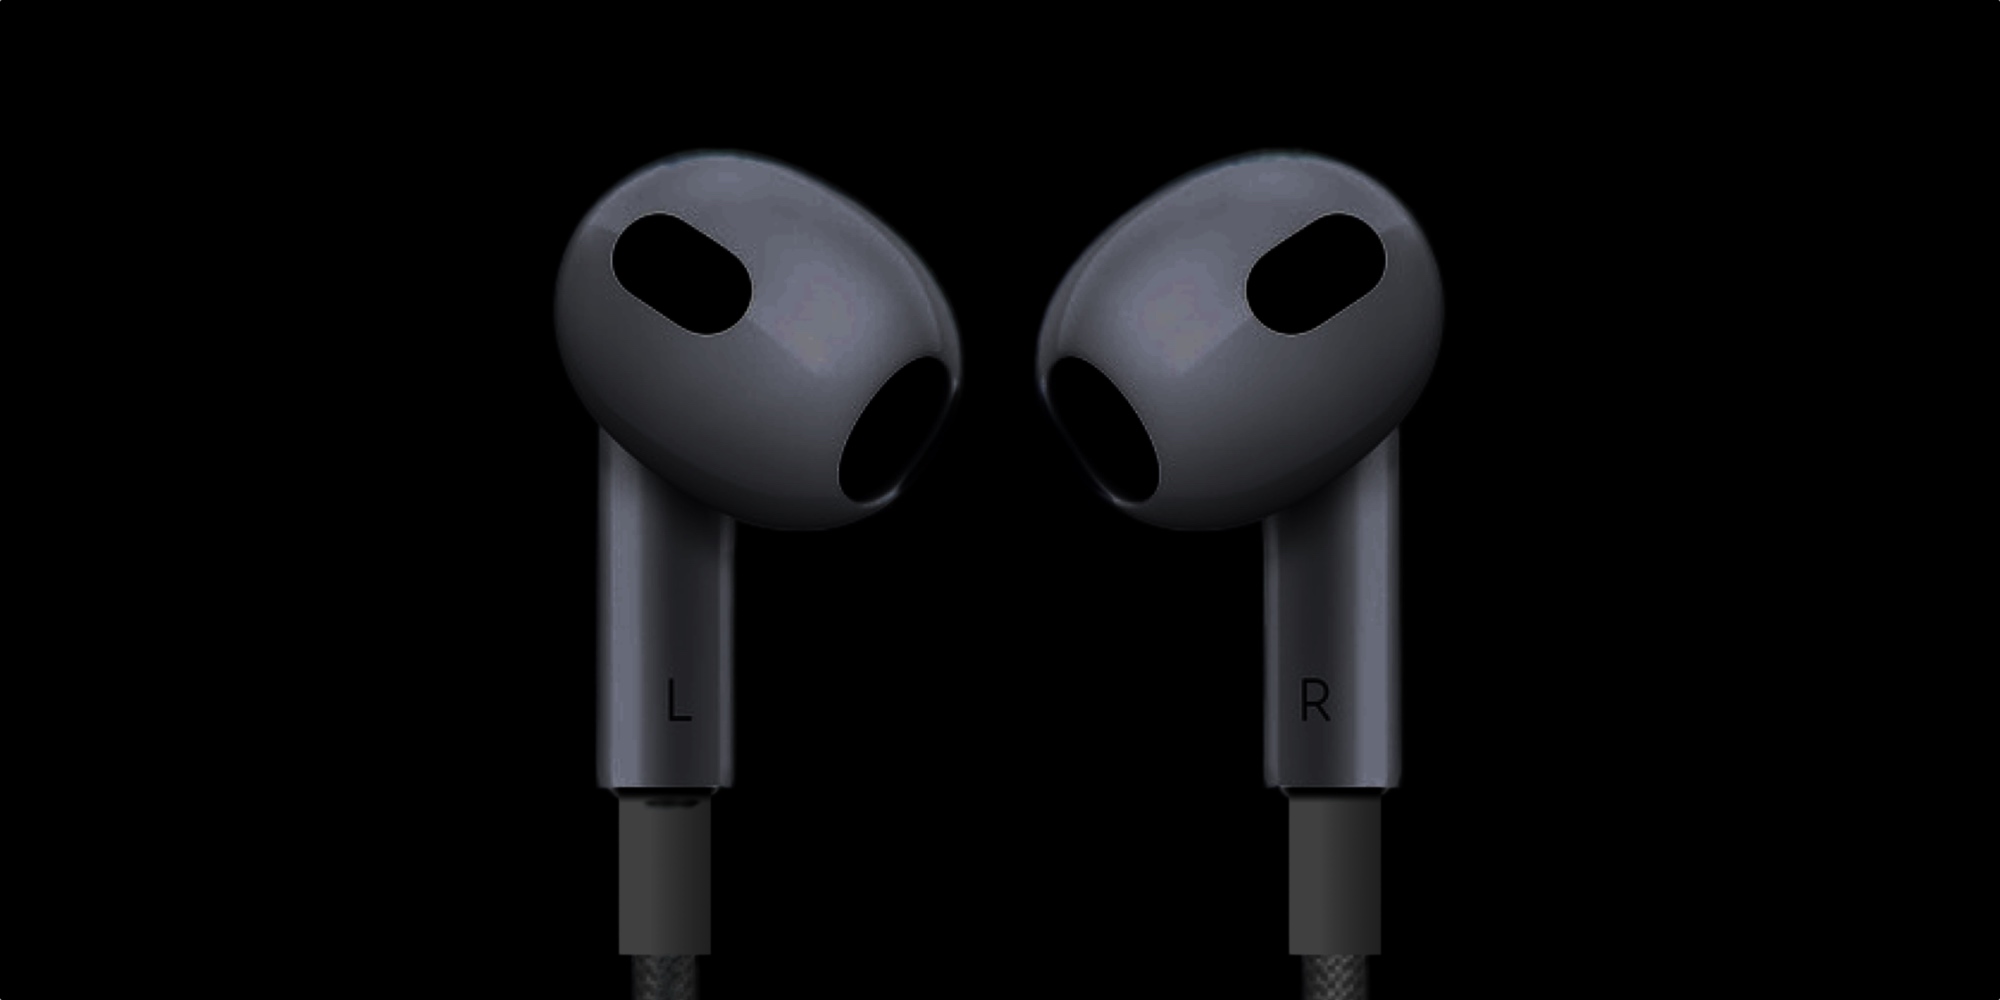 Concept: EarPods (2021) with a braided cable, Spatial Audio, new ...